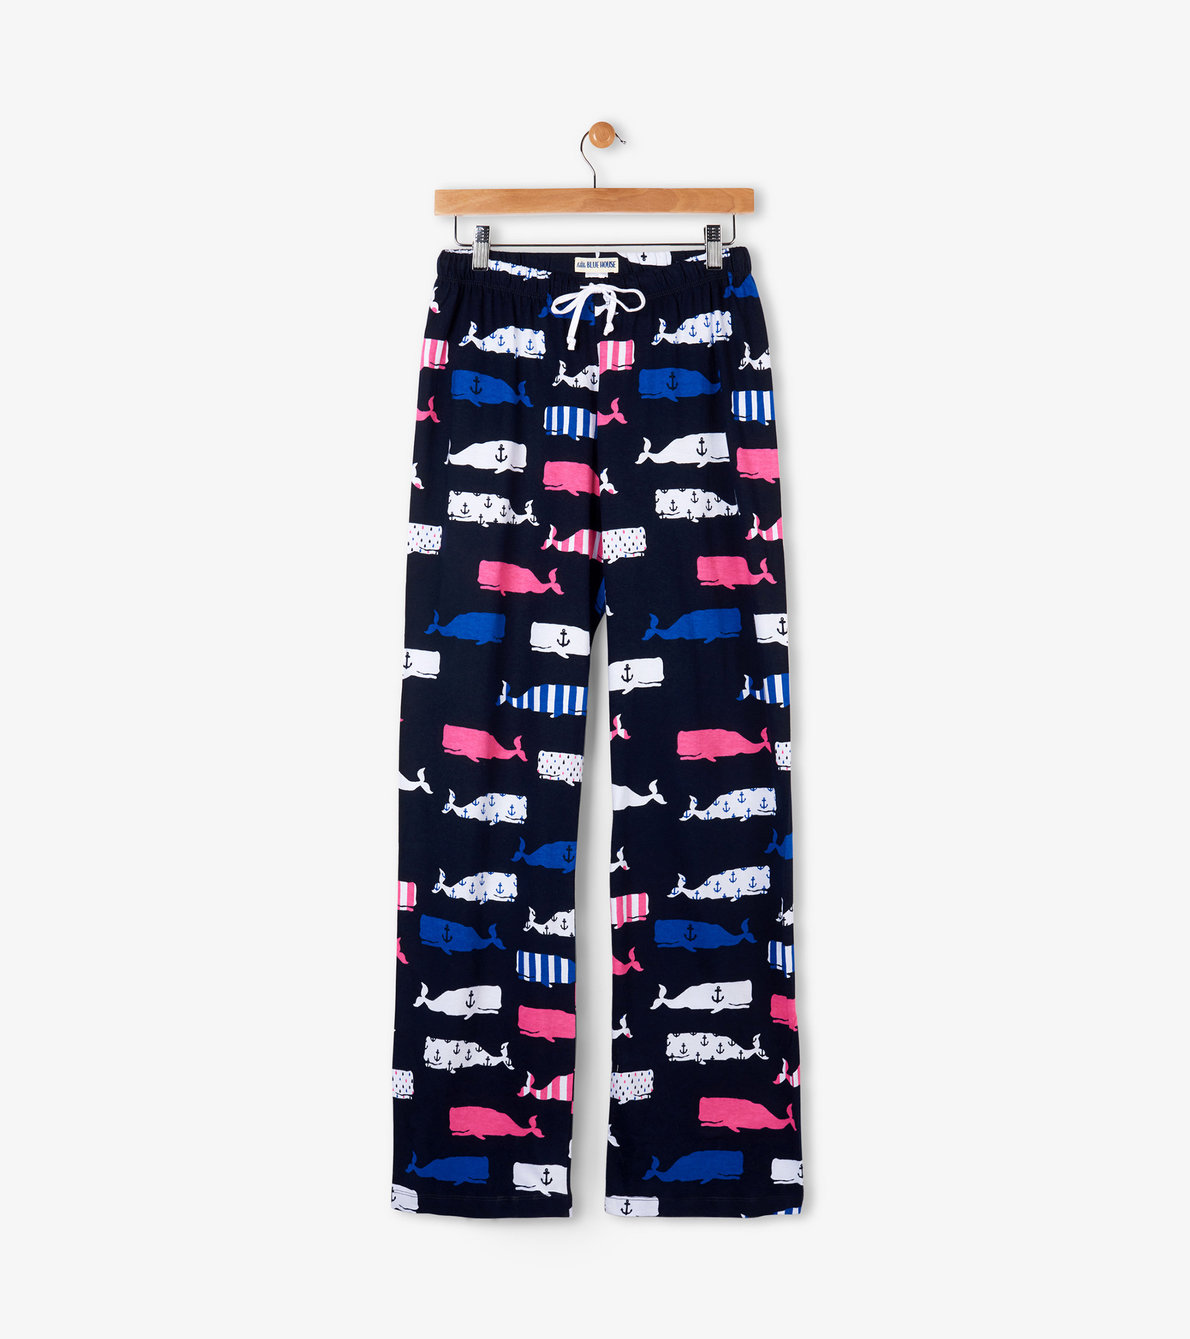 View larger image of Whales Women's Jersey Pajama Pants